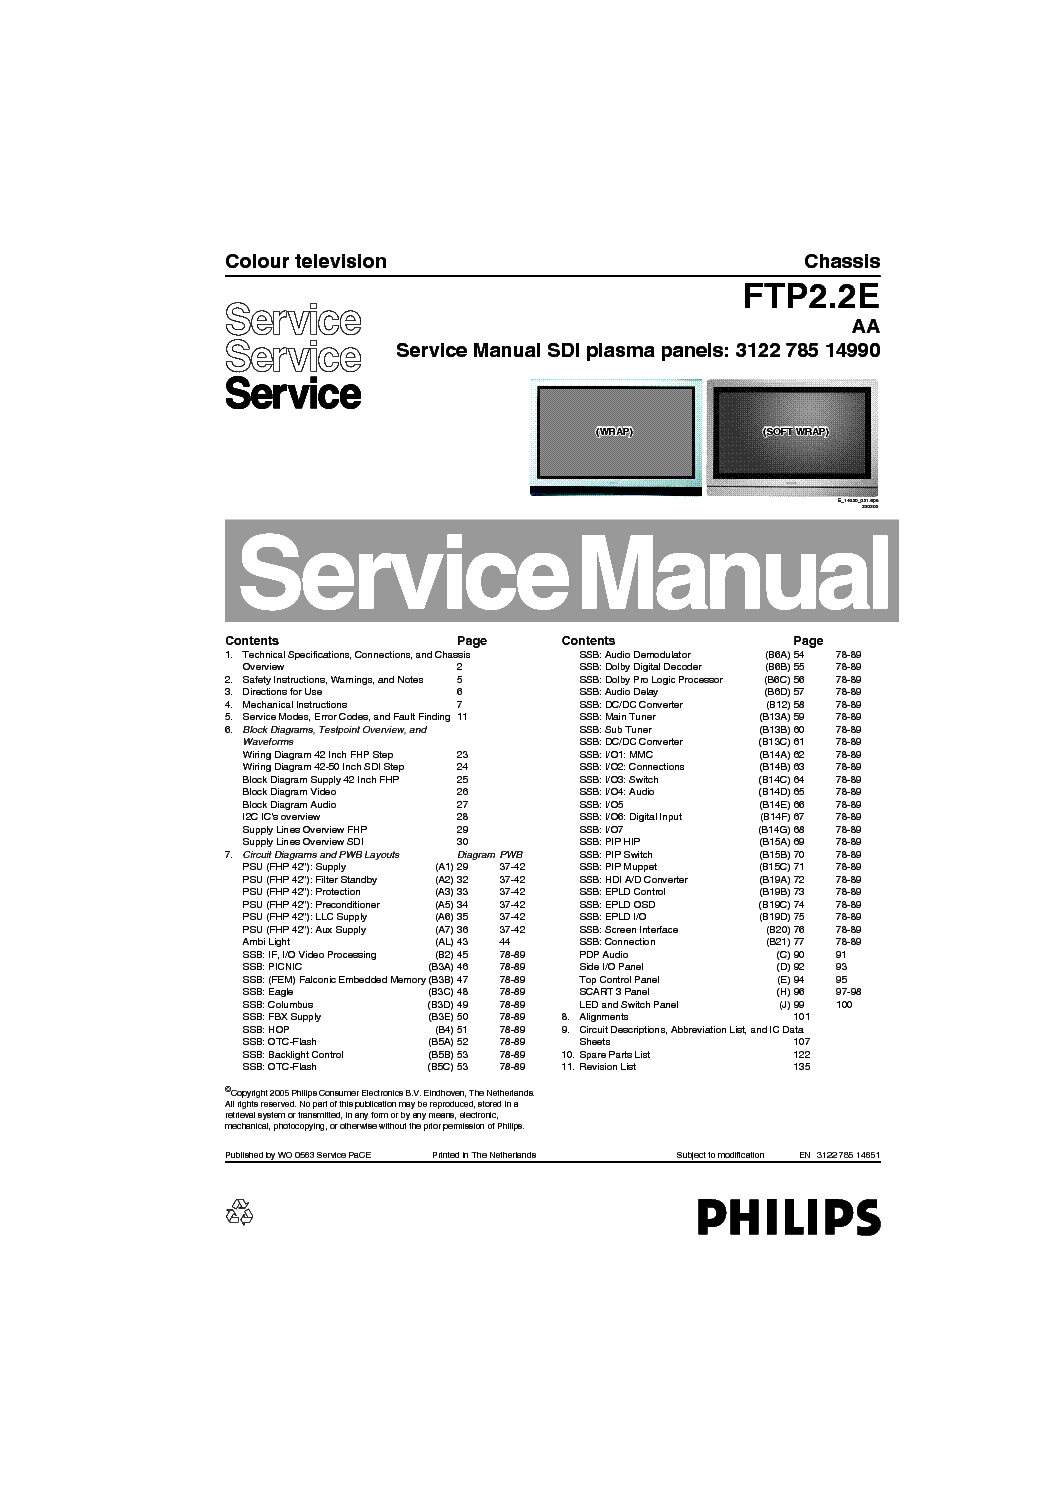 PHILIPS CHASSIS FTP2.2E AA SM service manual (1st page)